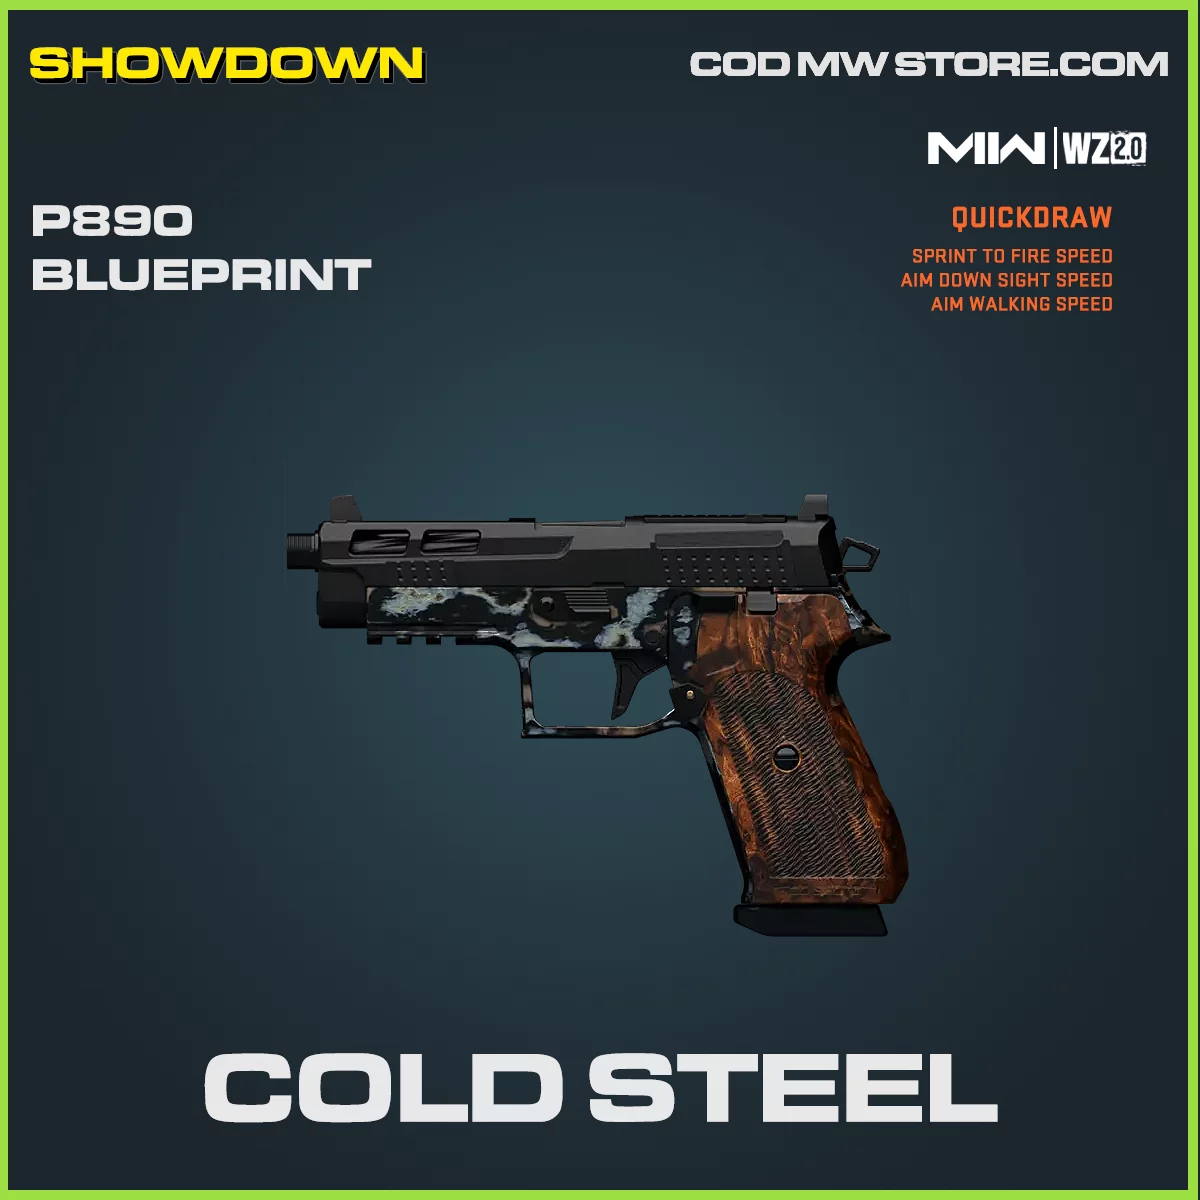 Cold steel P890 blueprint skin in Warzone 2 and MW2